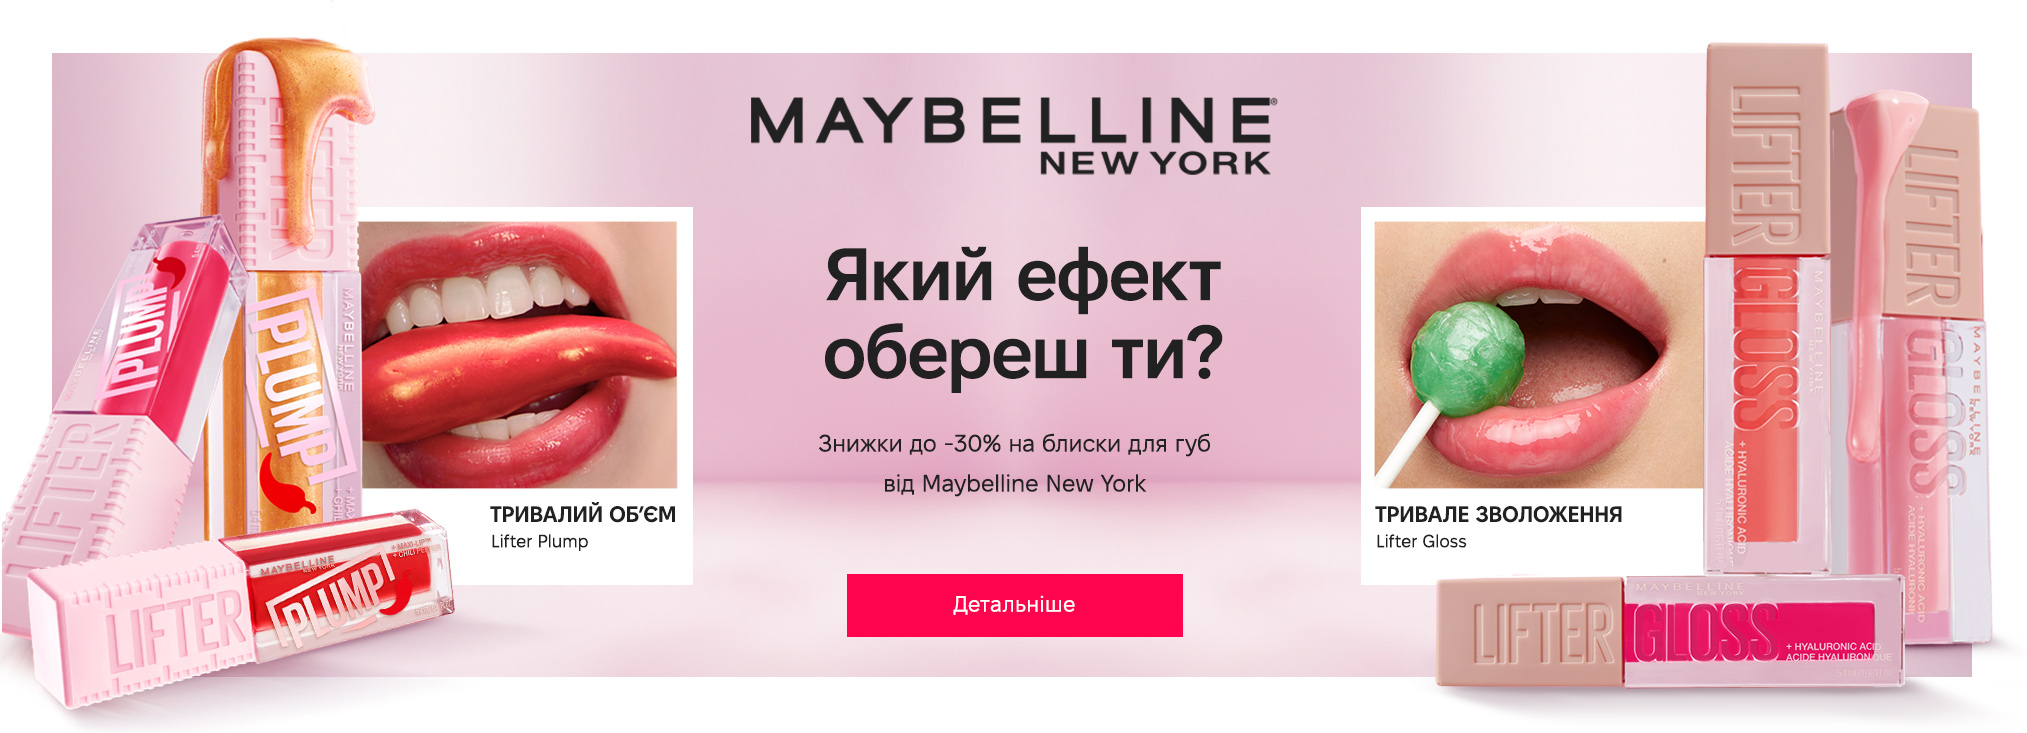 Maybelline New York_actions